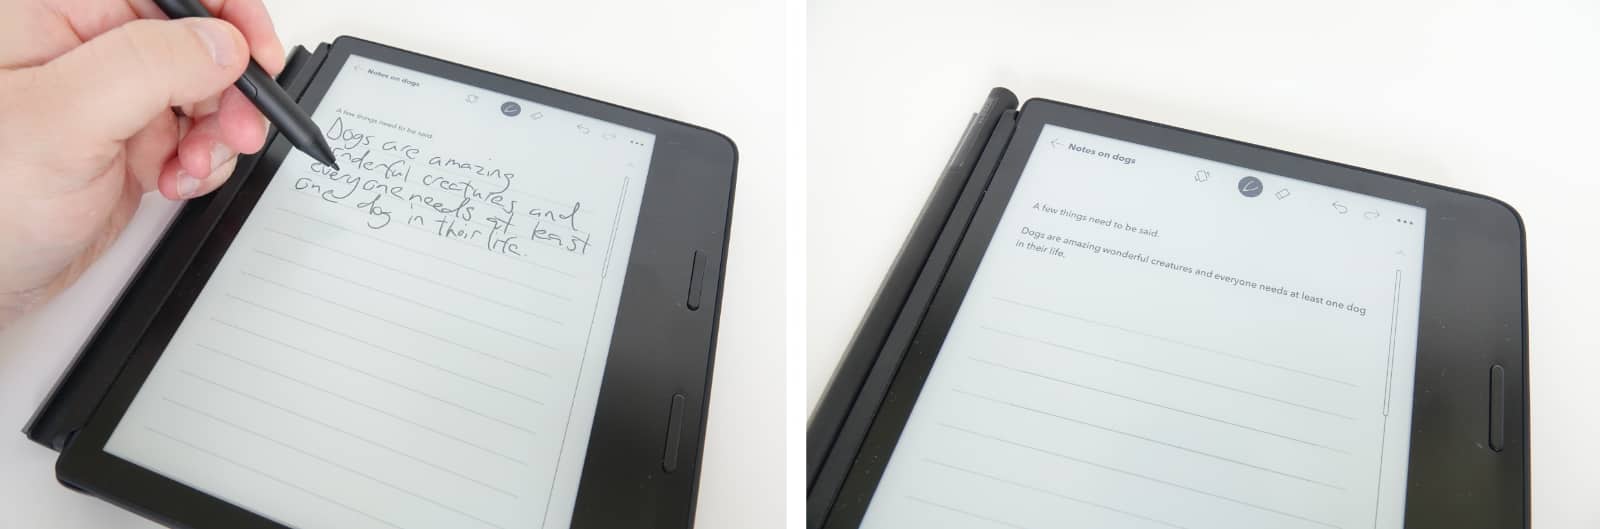 Kobo Sage Note-Taking Review – Fabulous New Catalog of Amazing Things!